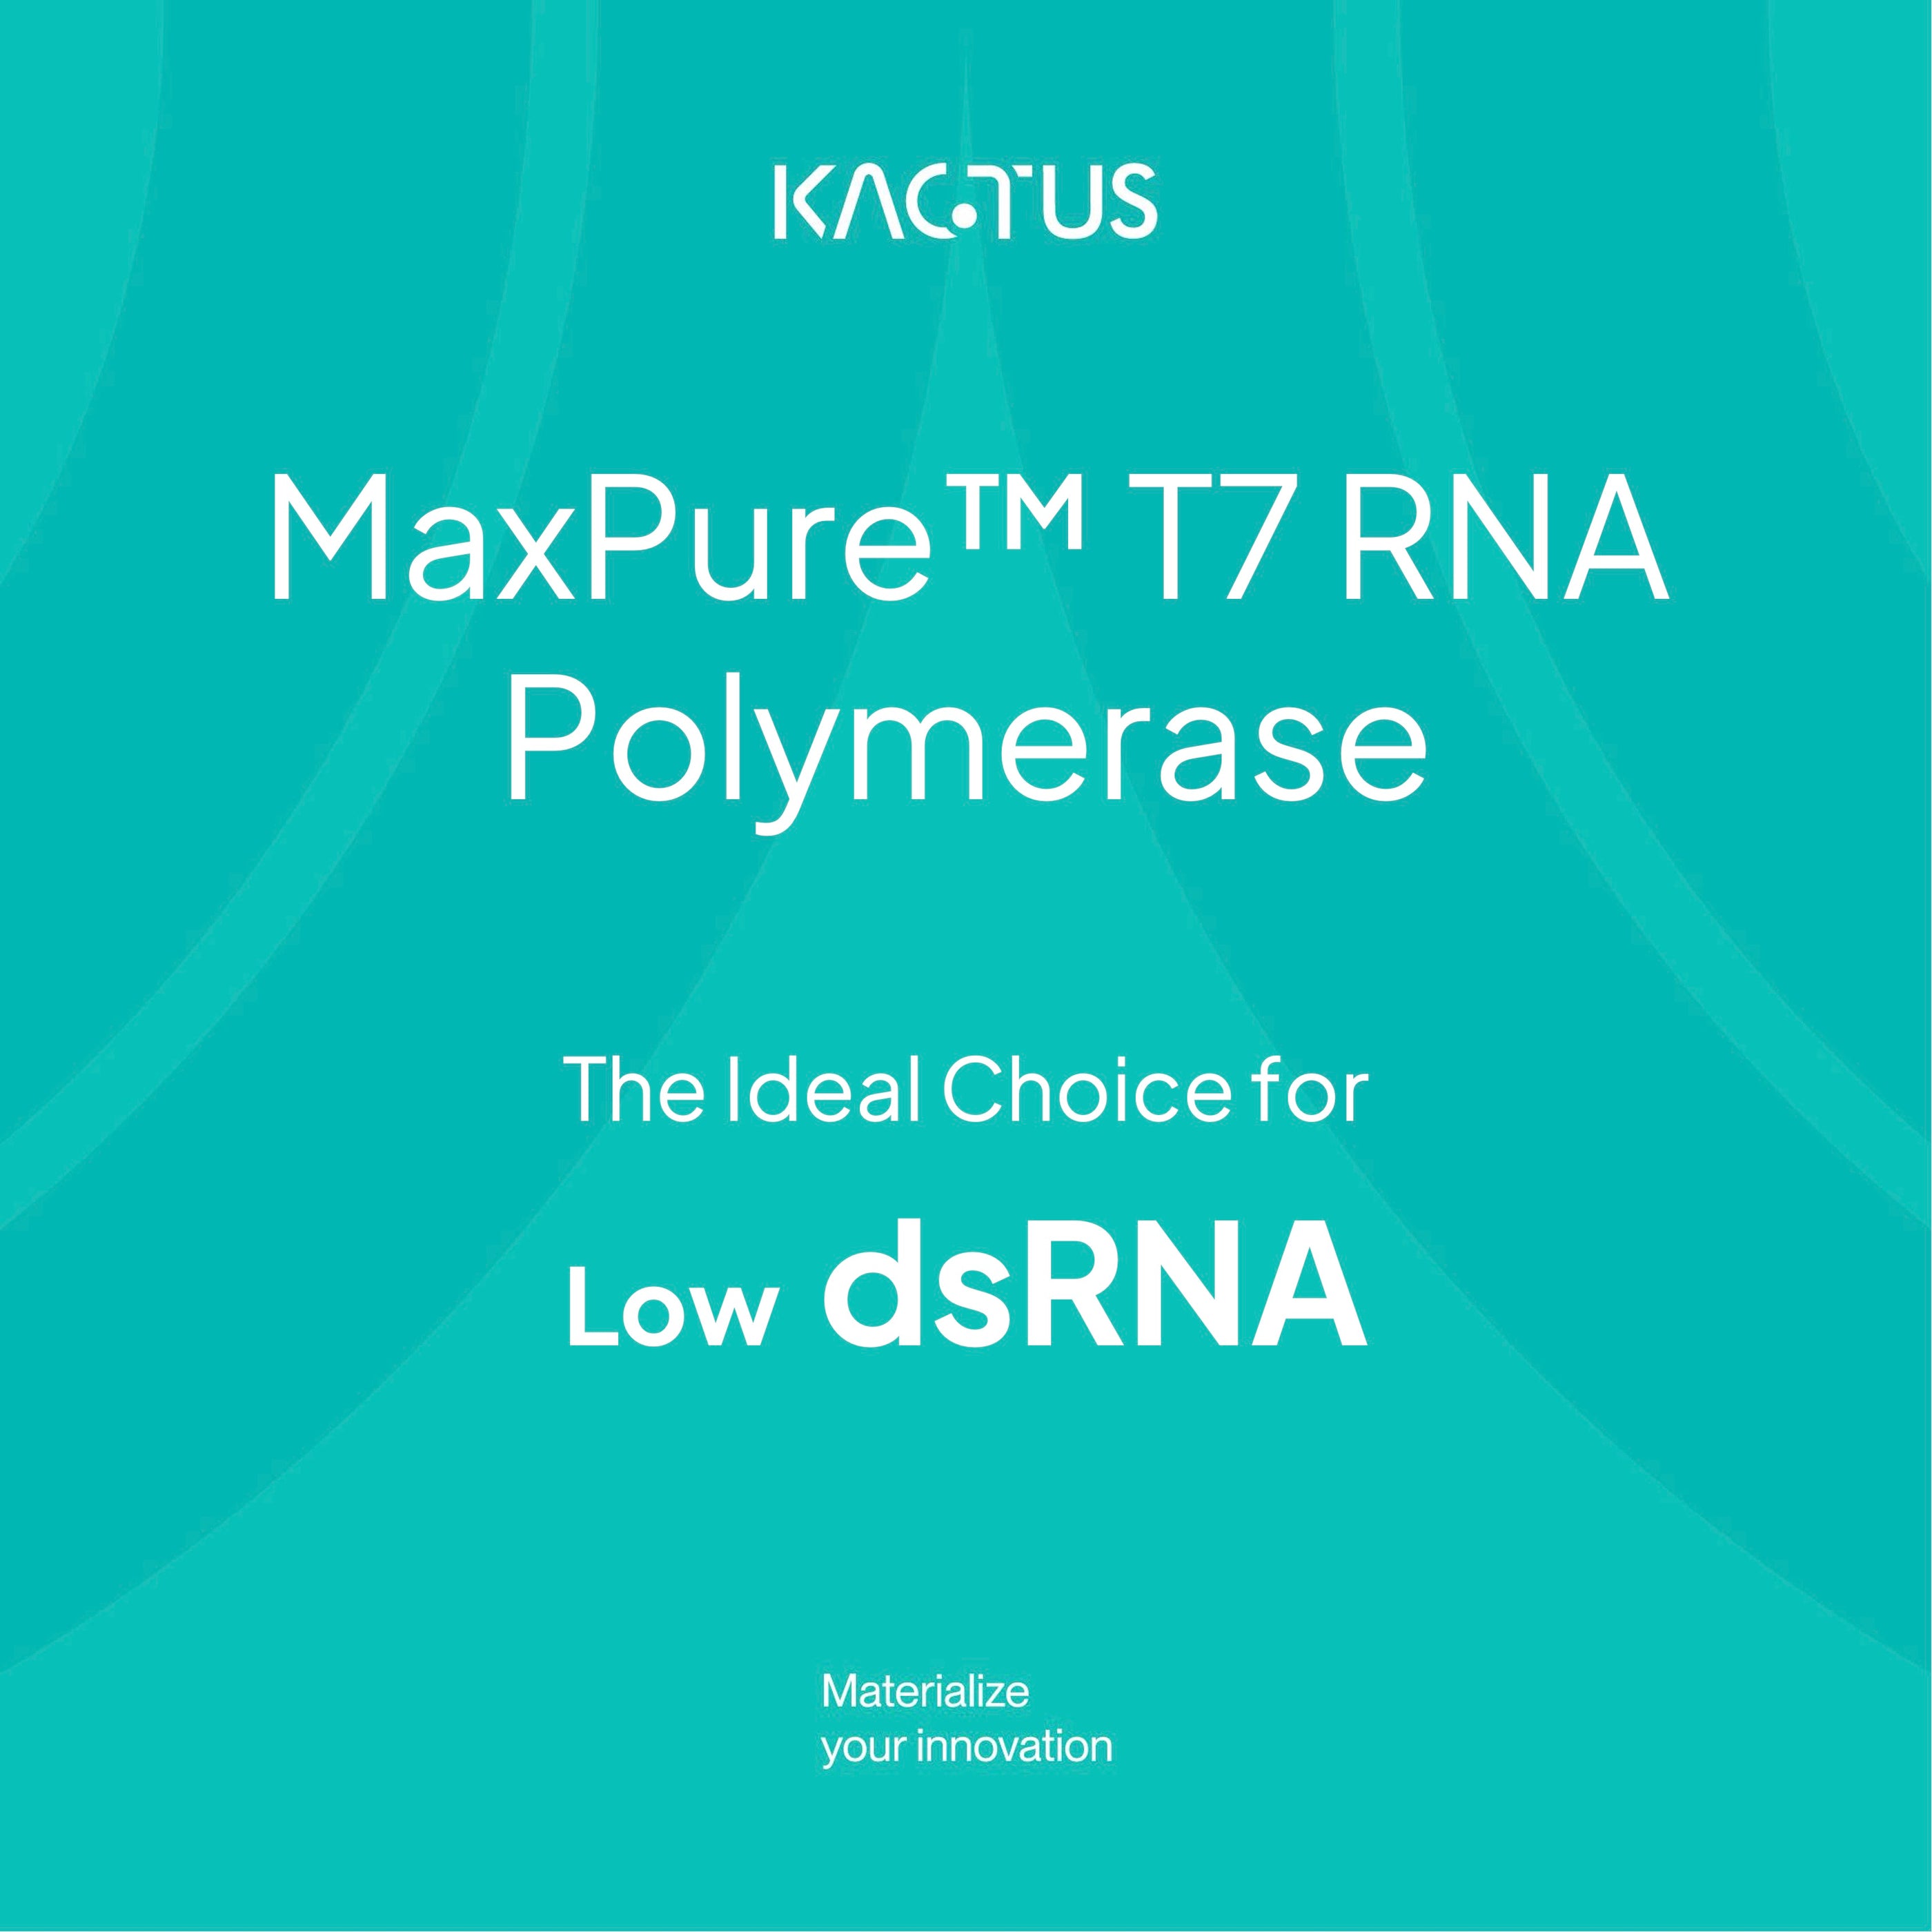 The Ideal Choice for Low dsRNA: MaxPure™ T7 RNA Polymerase